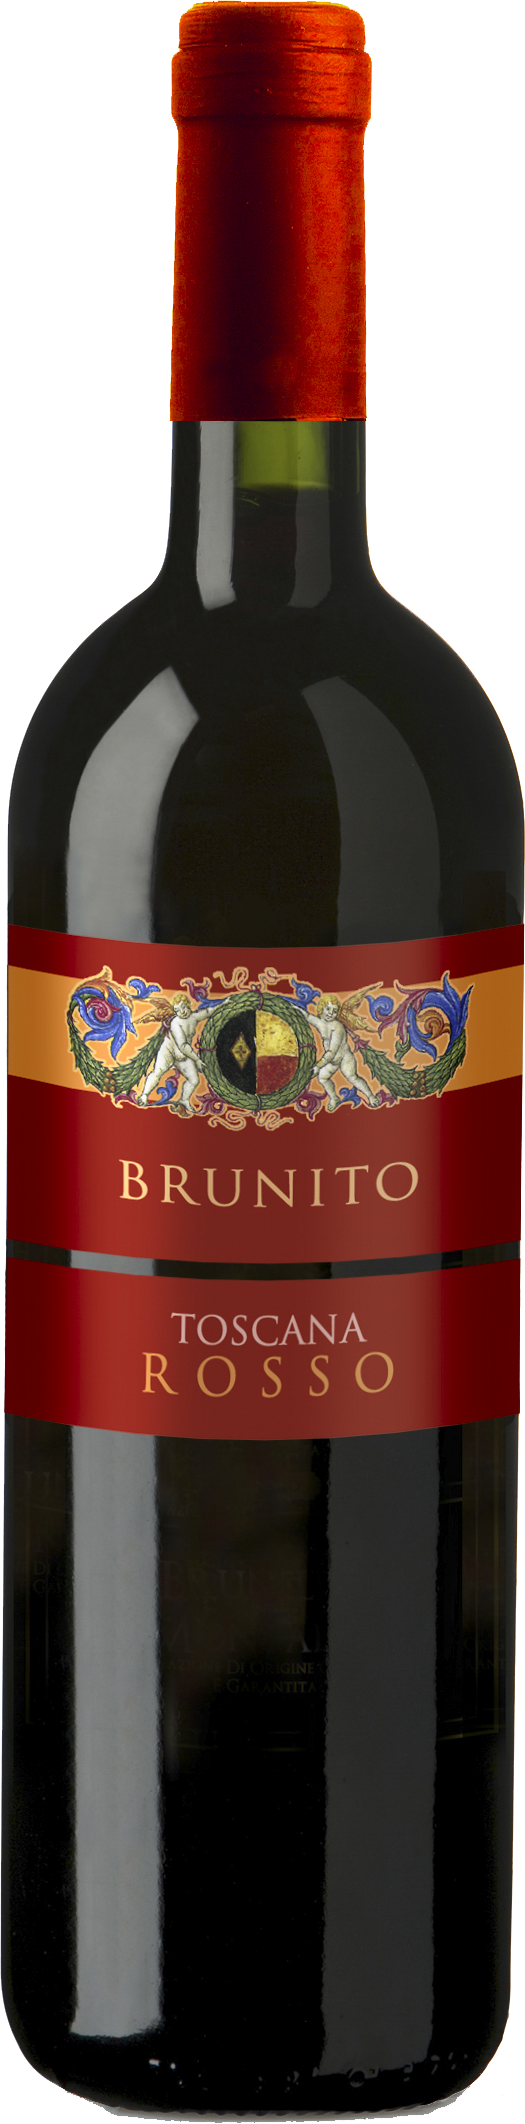 Brunito Rosso Toscana IGT 2021 - 750 ml - GES Sorrentino